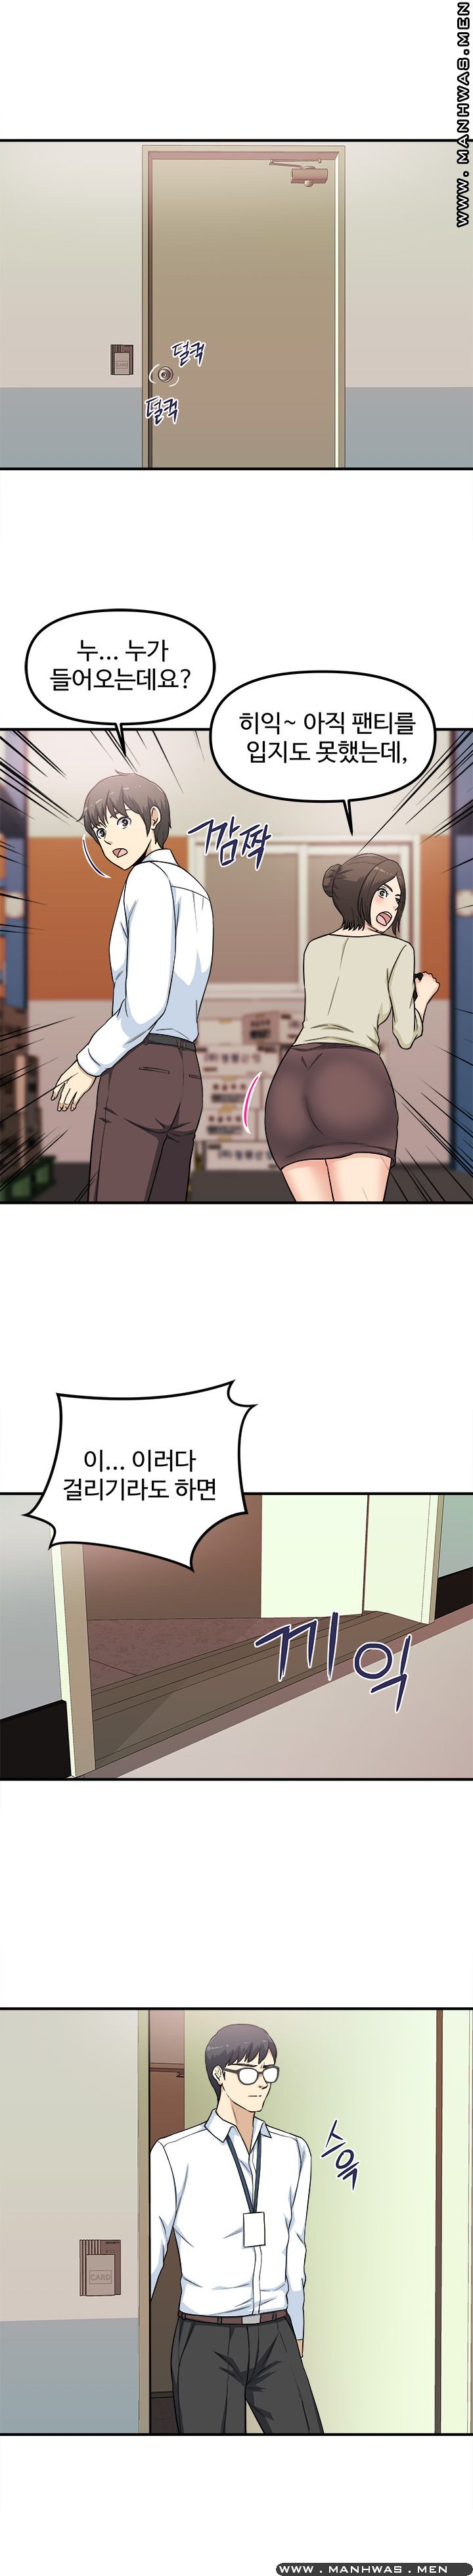 Office Bible Raw - Chapter 8 Page 17